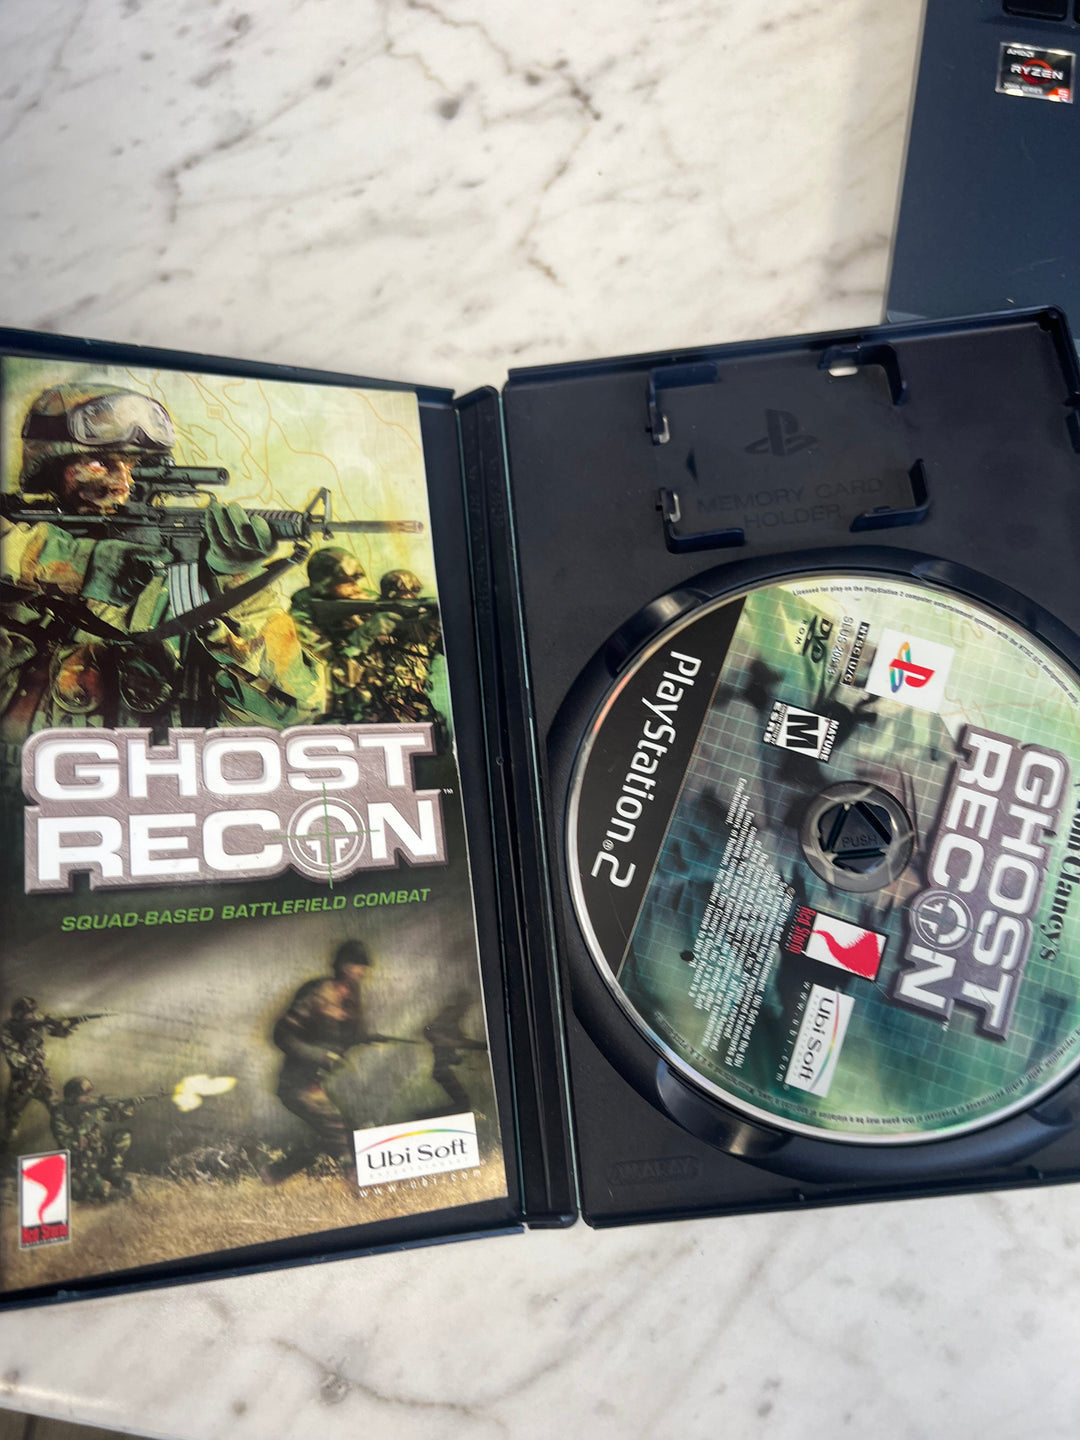 Tom Clancy's Ghost Recon for Playstation 2 PS2 in case. Tested and Working.     DO62924